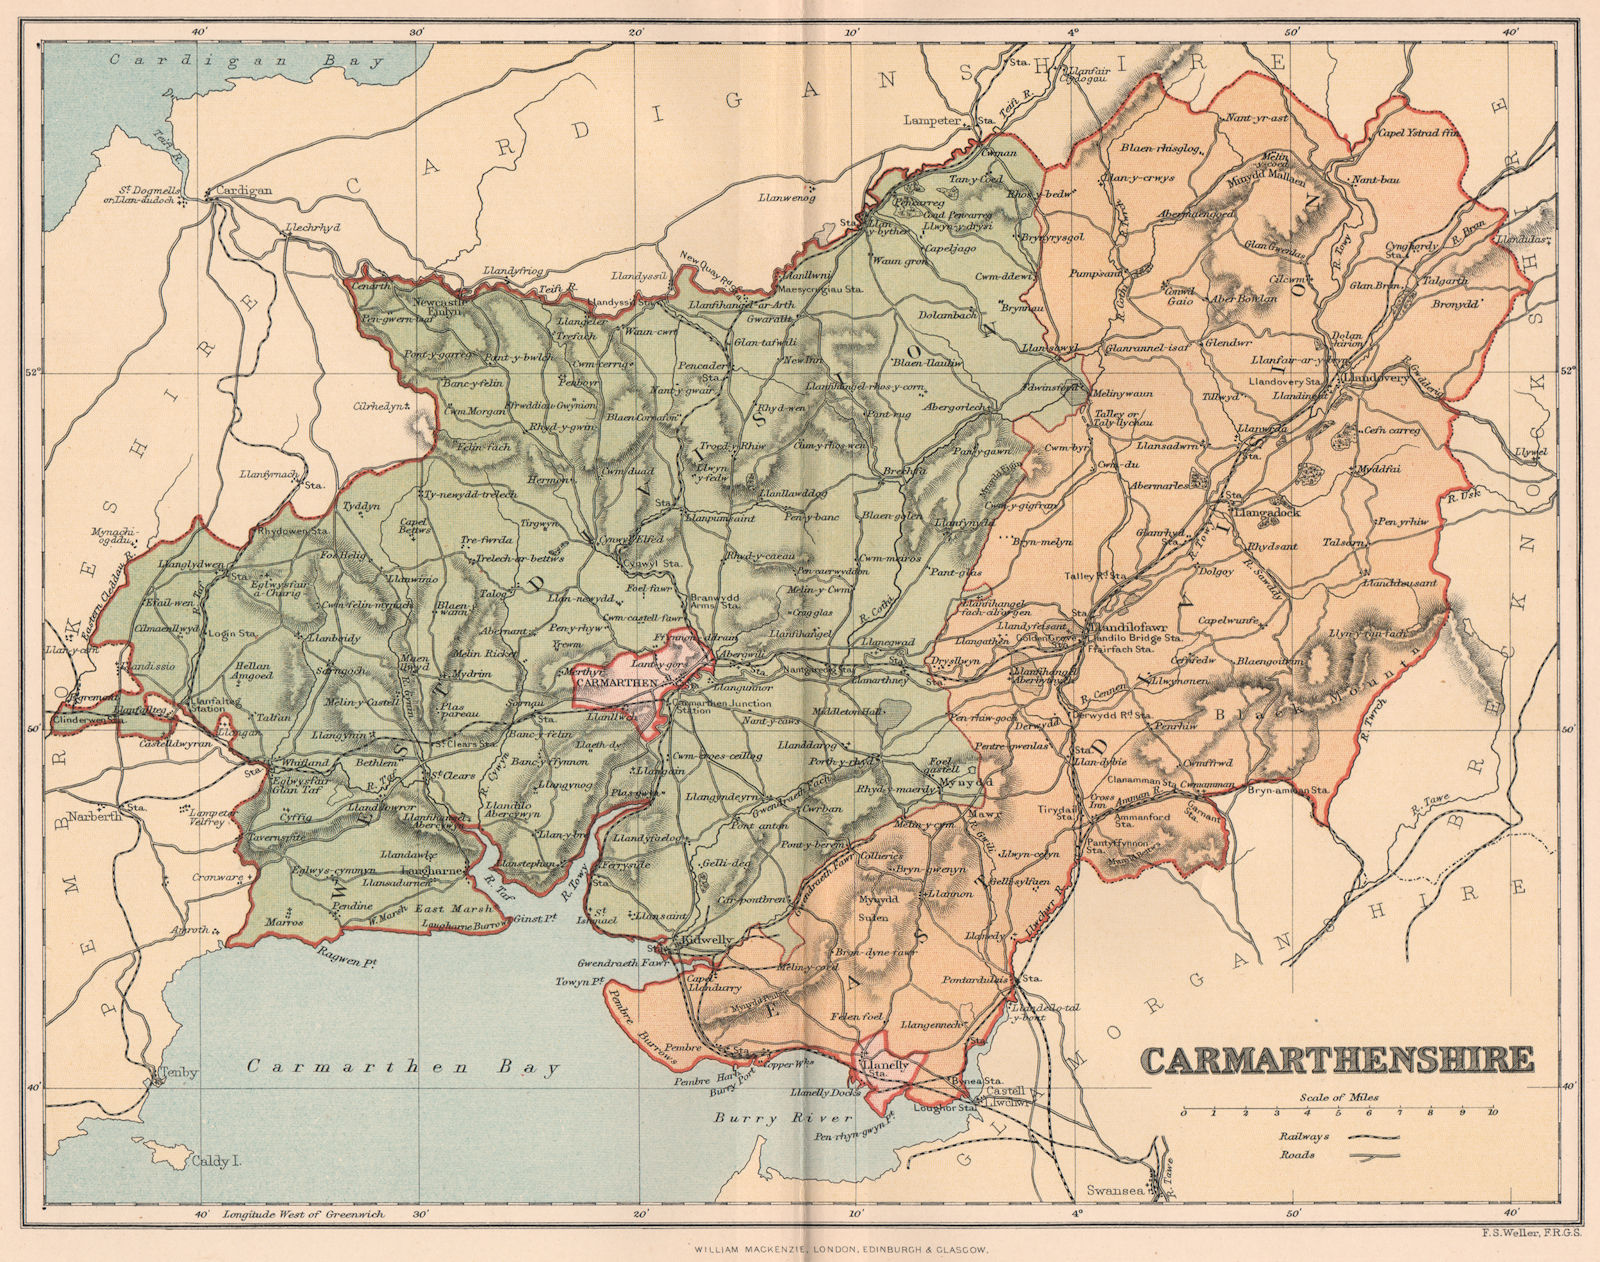 Associate Product CARMARTHENSHIRE. Antique county map. Wales 1893 old plan chart